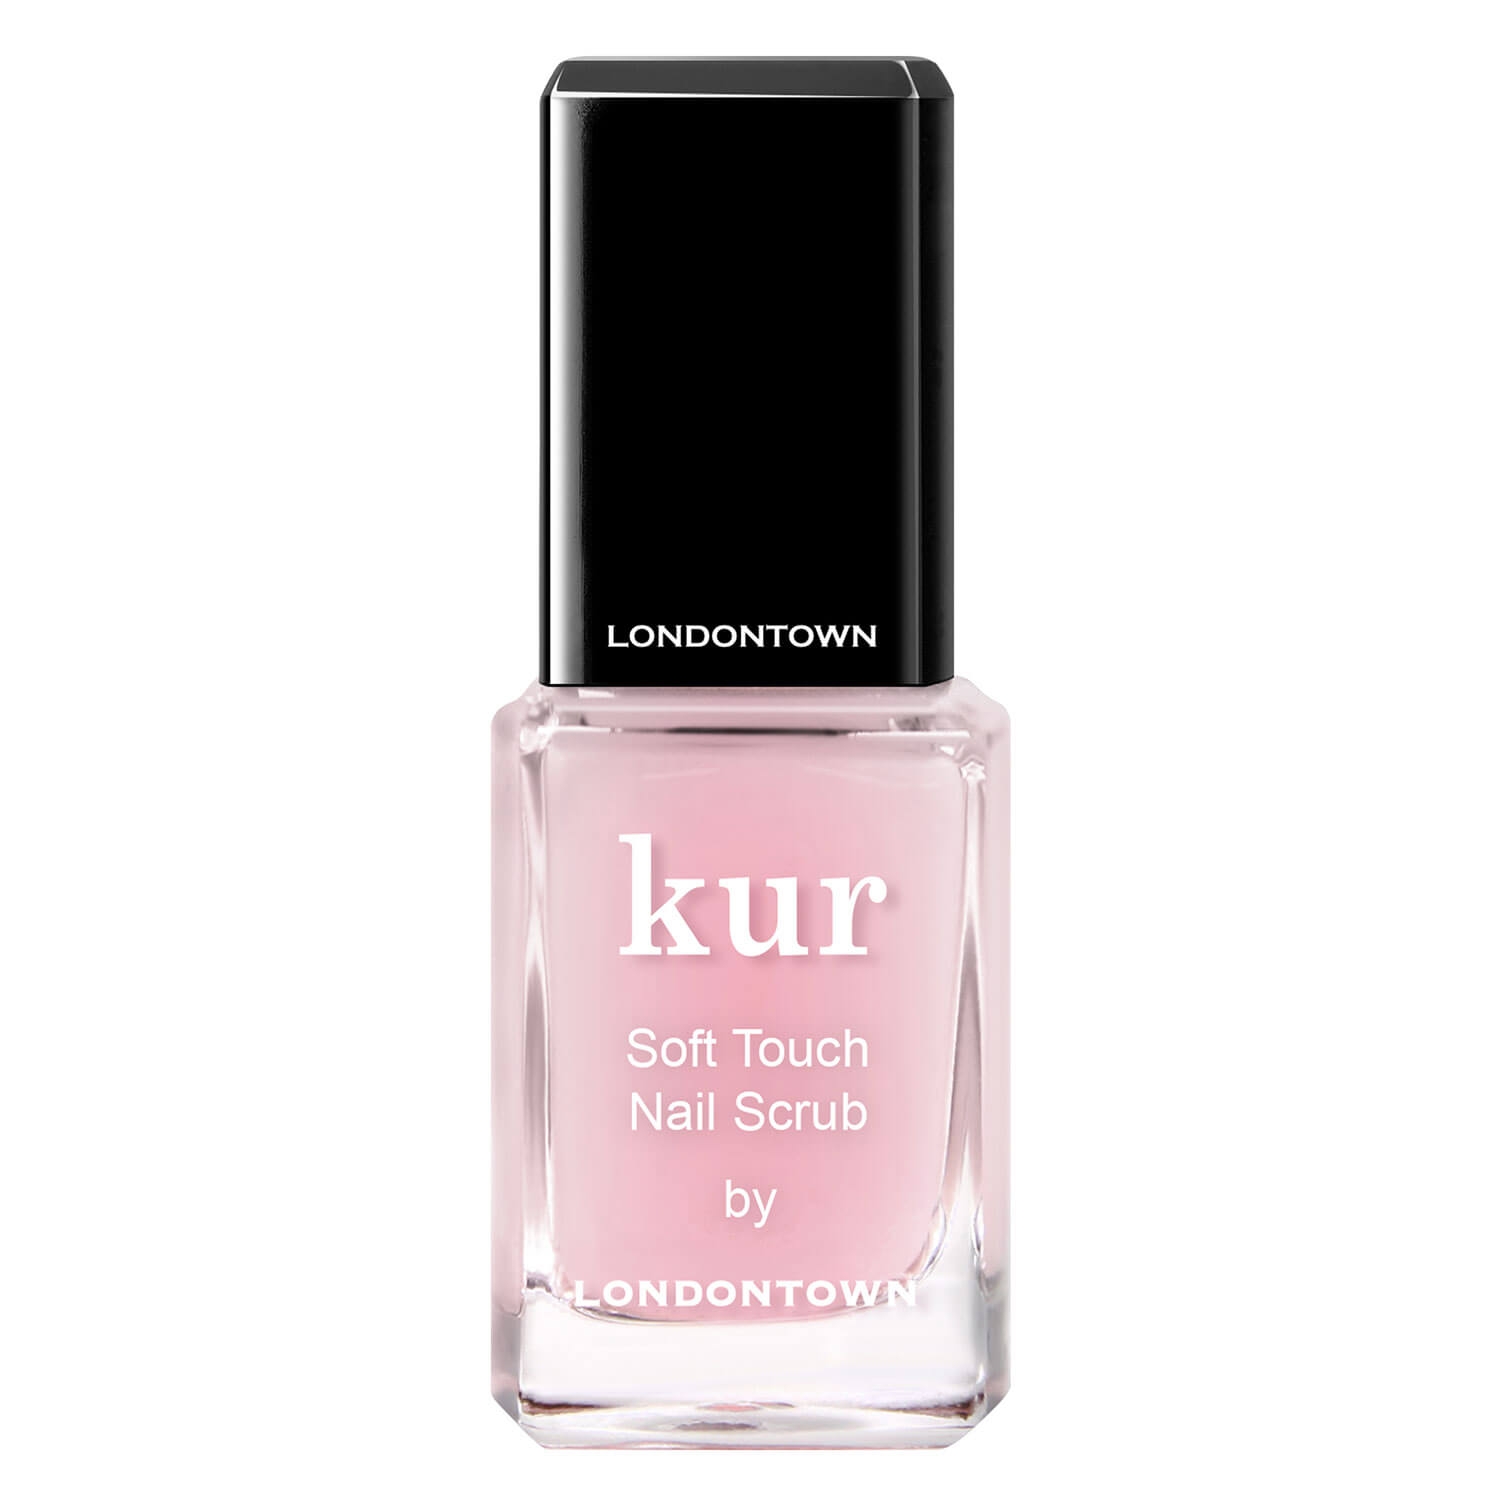 Product image from kur - Soft Touch Nail Scrub